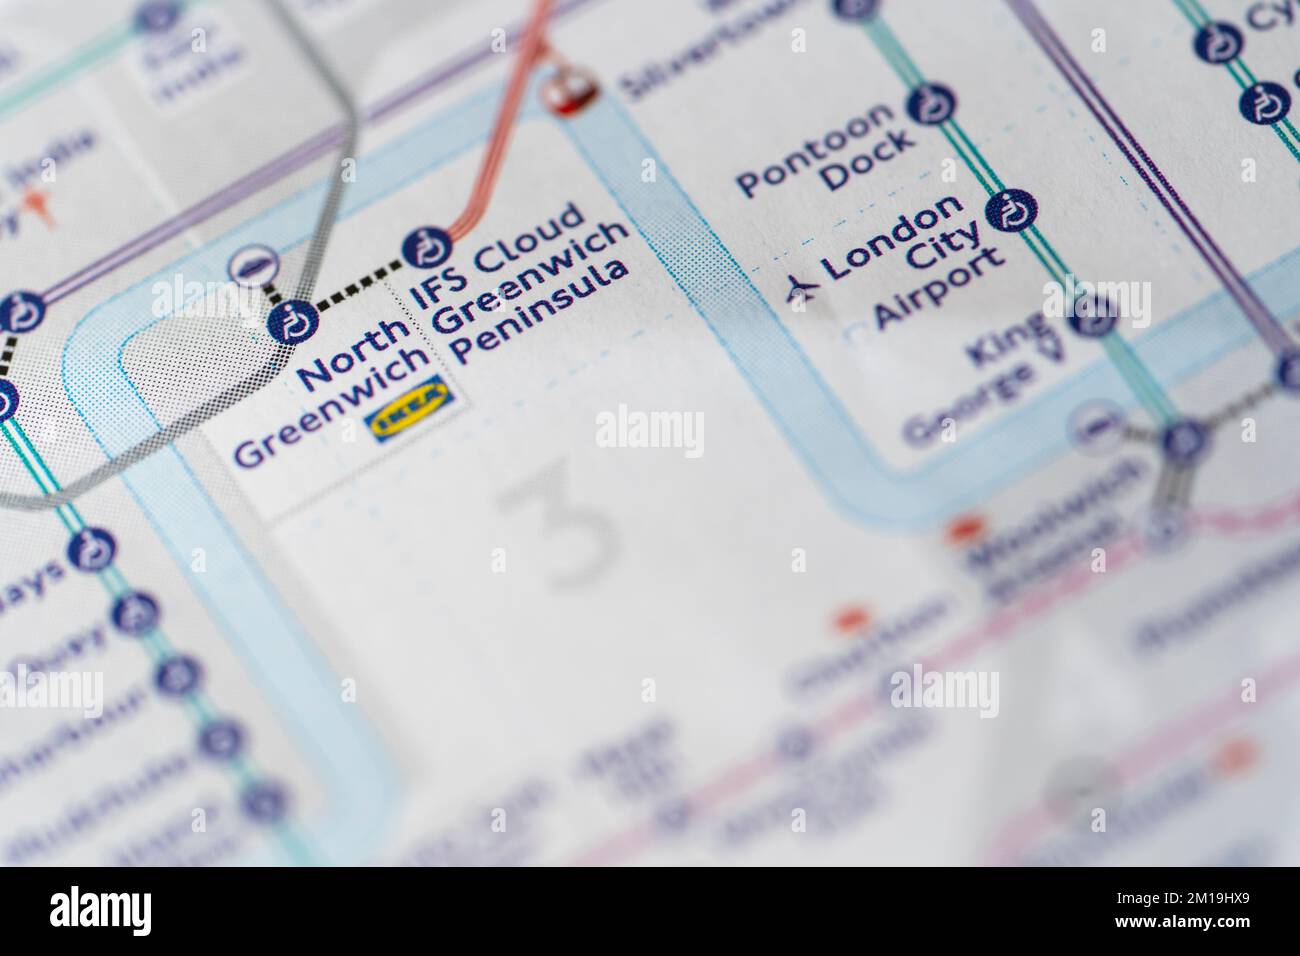 Macro closeup with a shallow depth of field of a London Underground Tube Map showing zones and North Greenwich and IFS Cloud Greenwich Peninsula Stock Photo